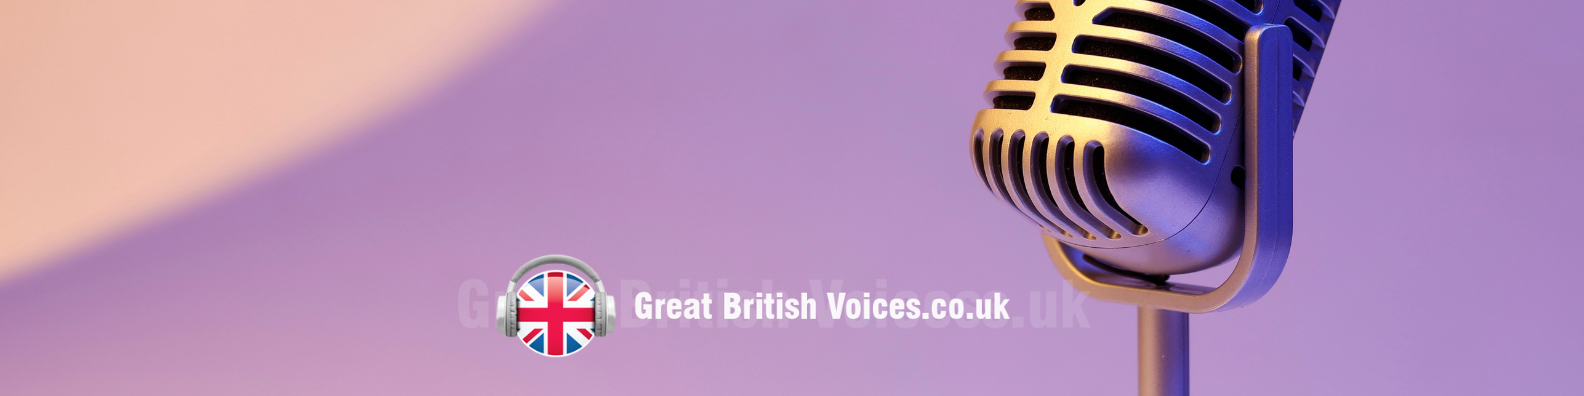 Find the best Voice Actors for character voice overs at Great British Voices